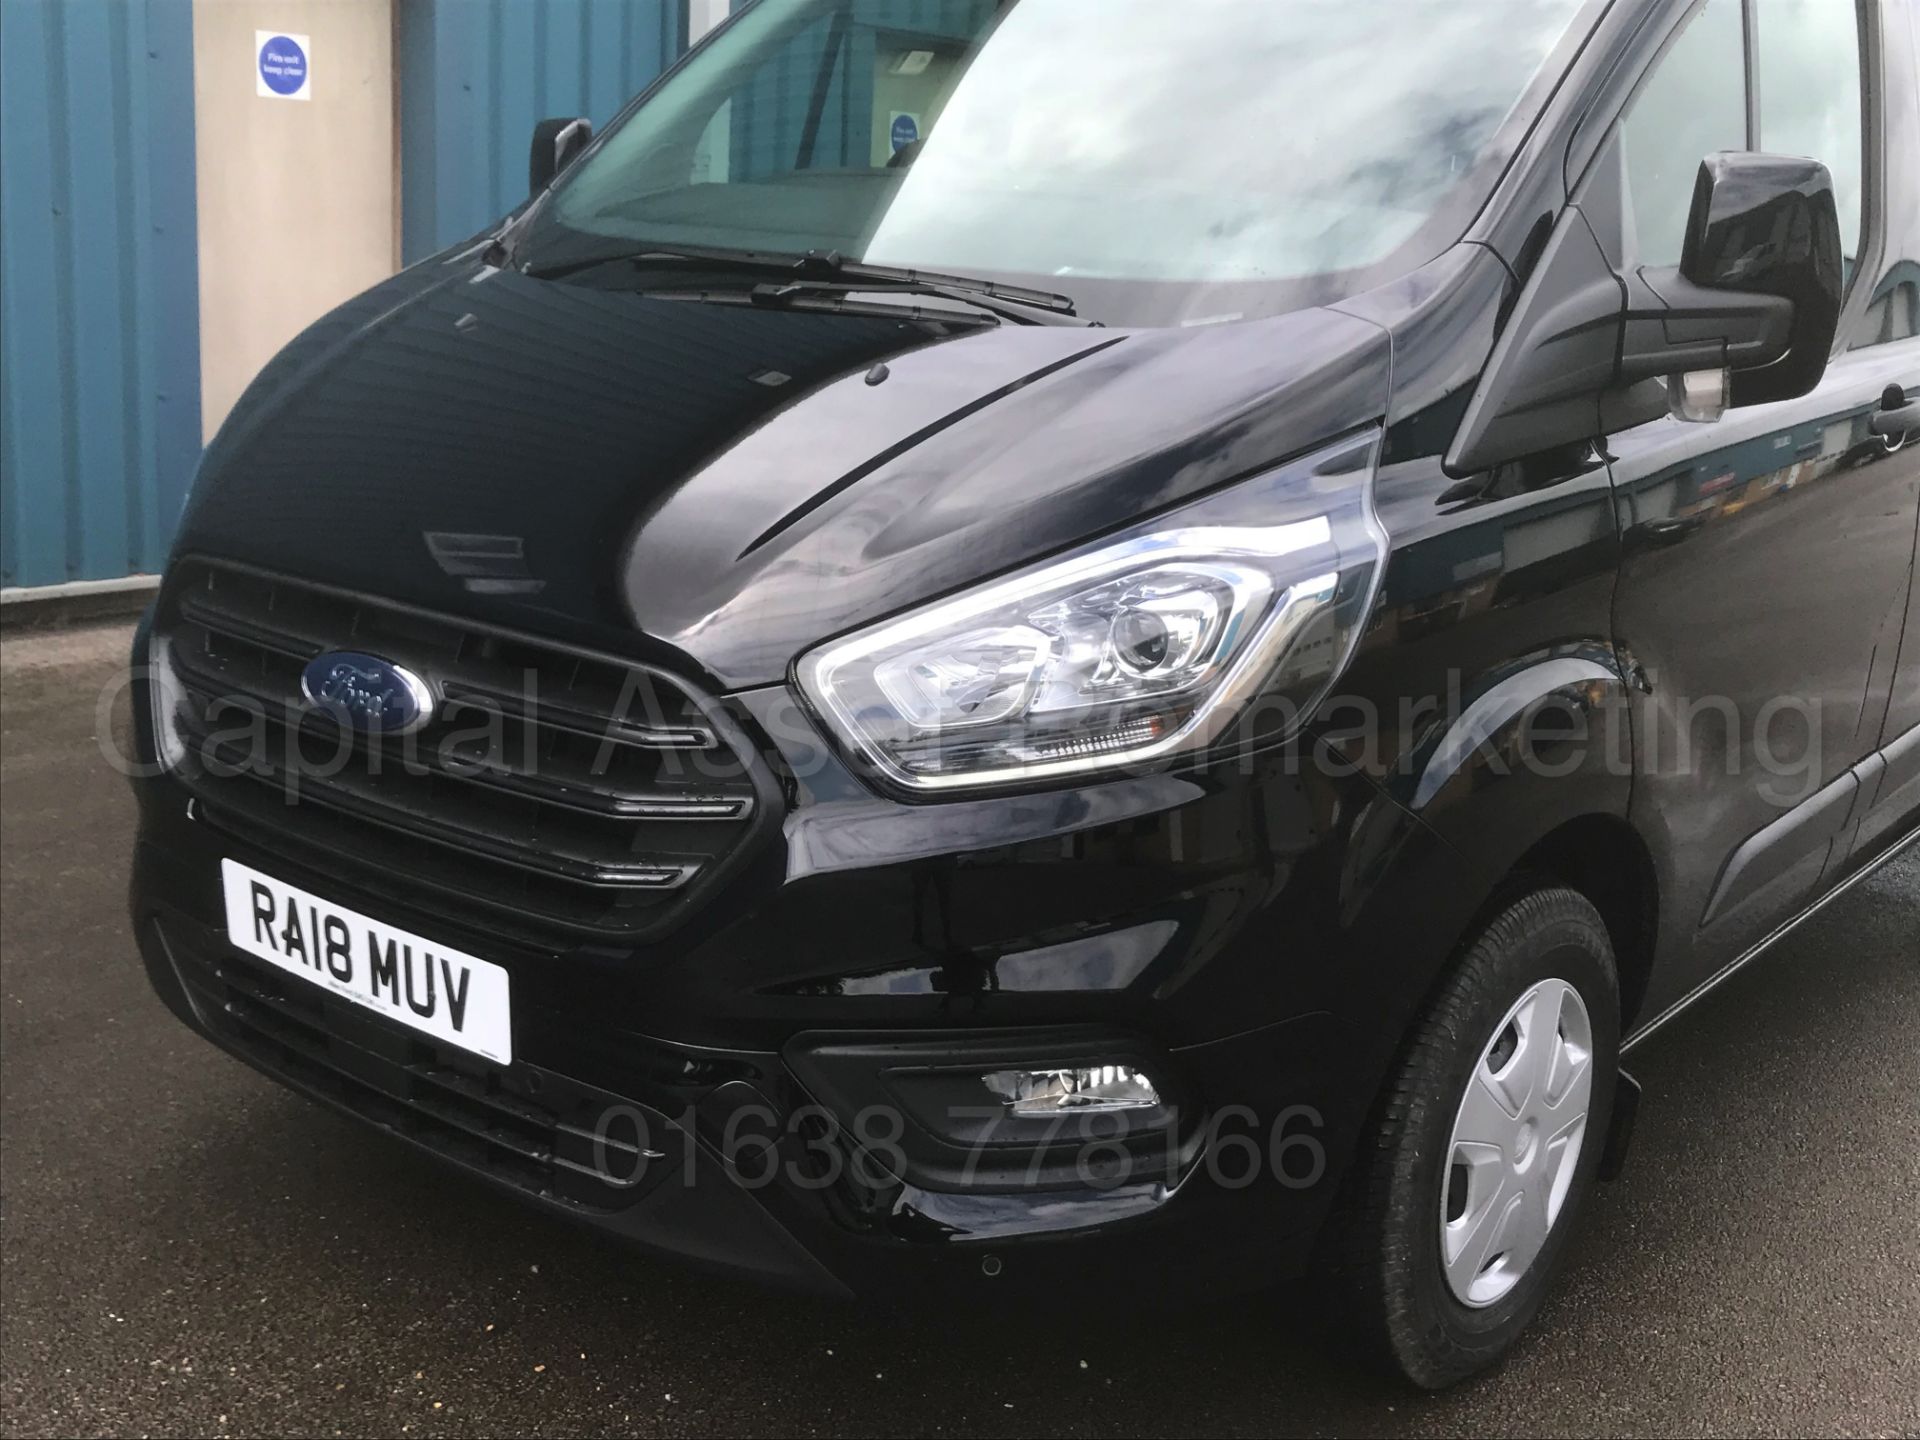 FORD TRANSIT CUSTOM *TREND EDITION* (2018 - ALL NEW MODEL) '2.0 TDCI - 6 SPEED' *DELIVERY MILEAGE* - Image 17 of 49